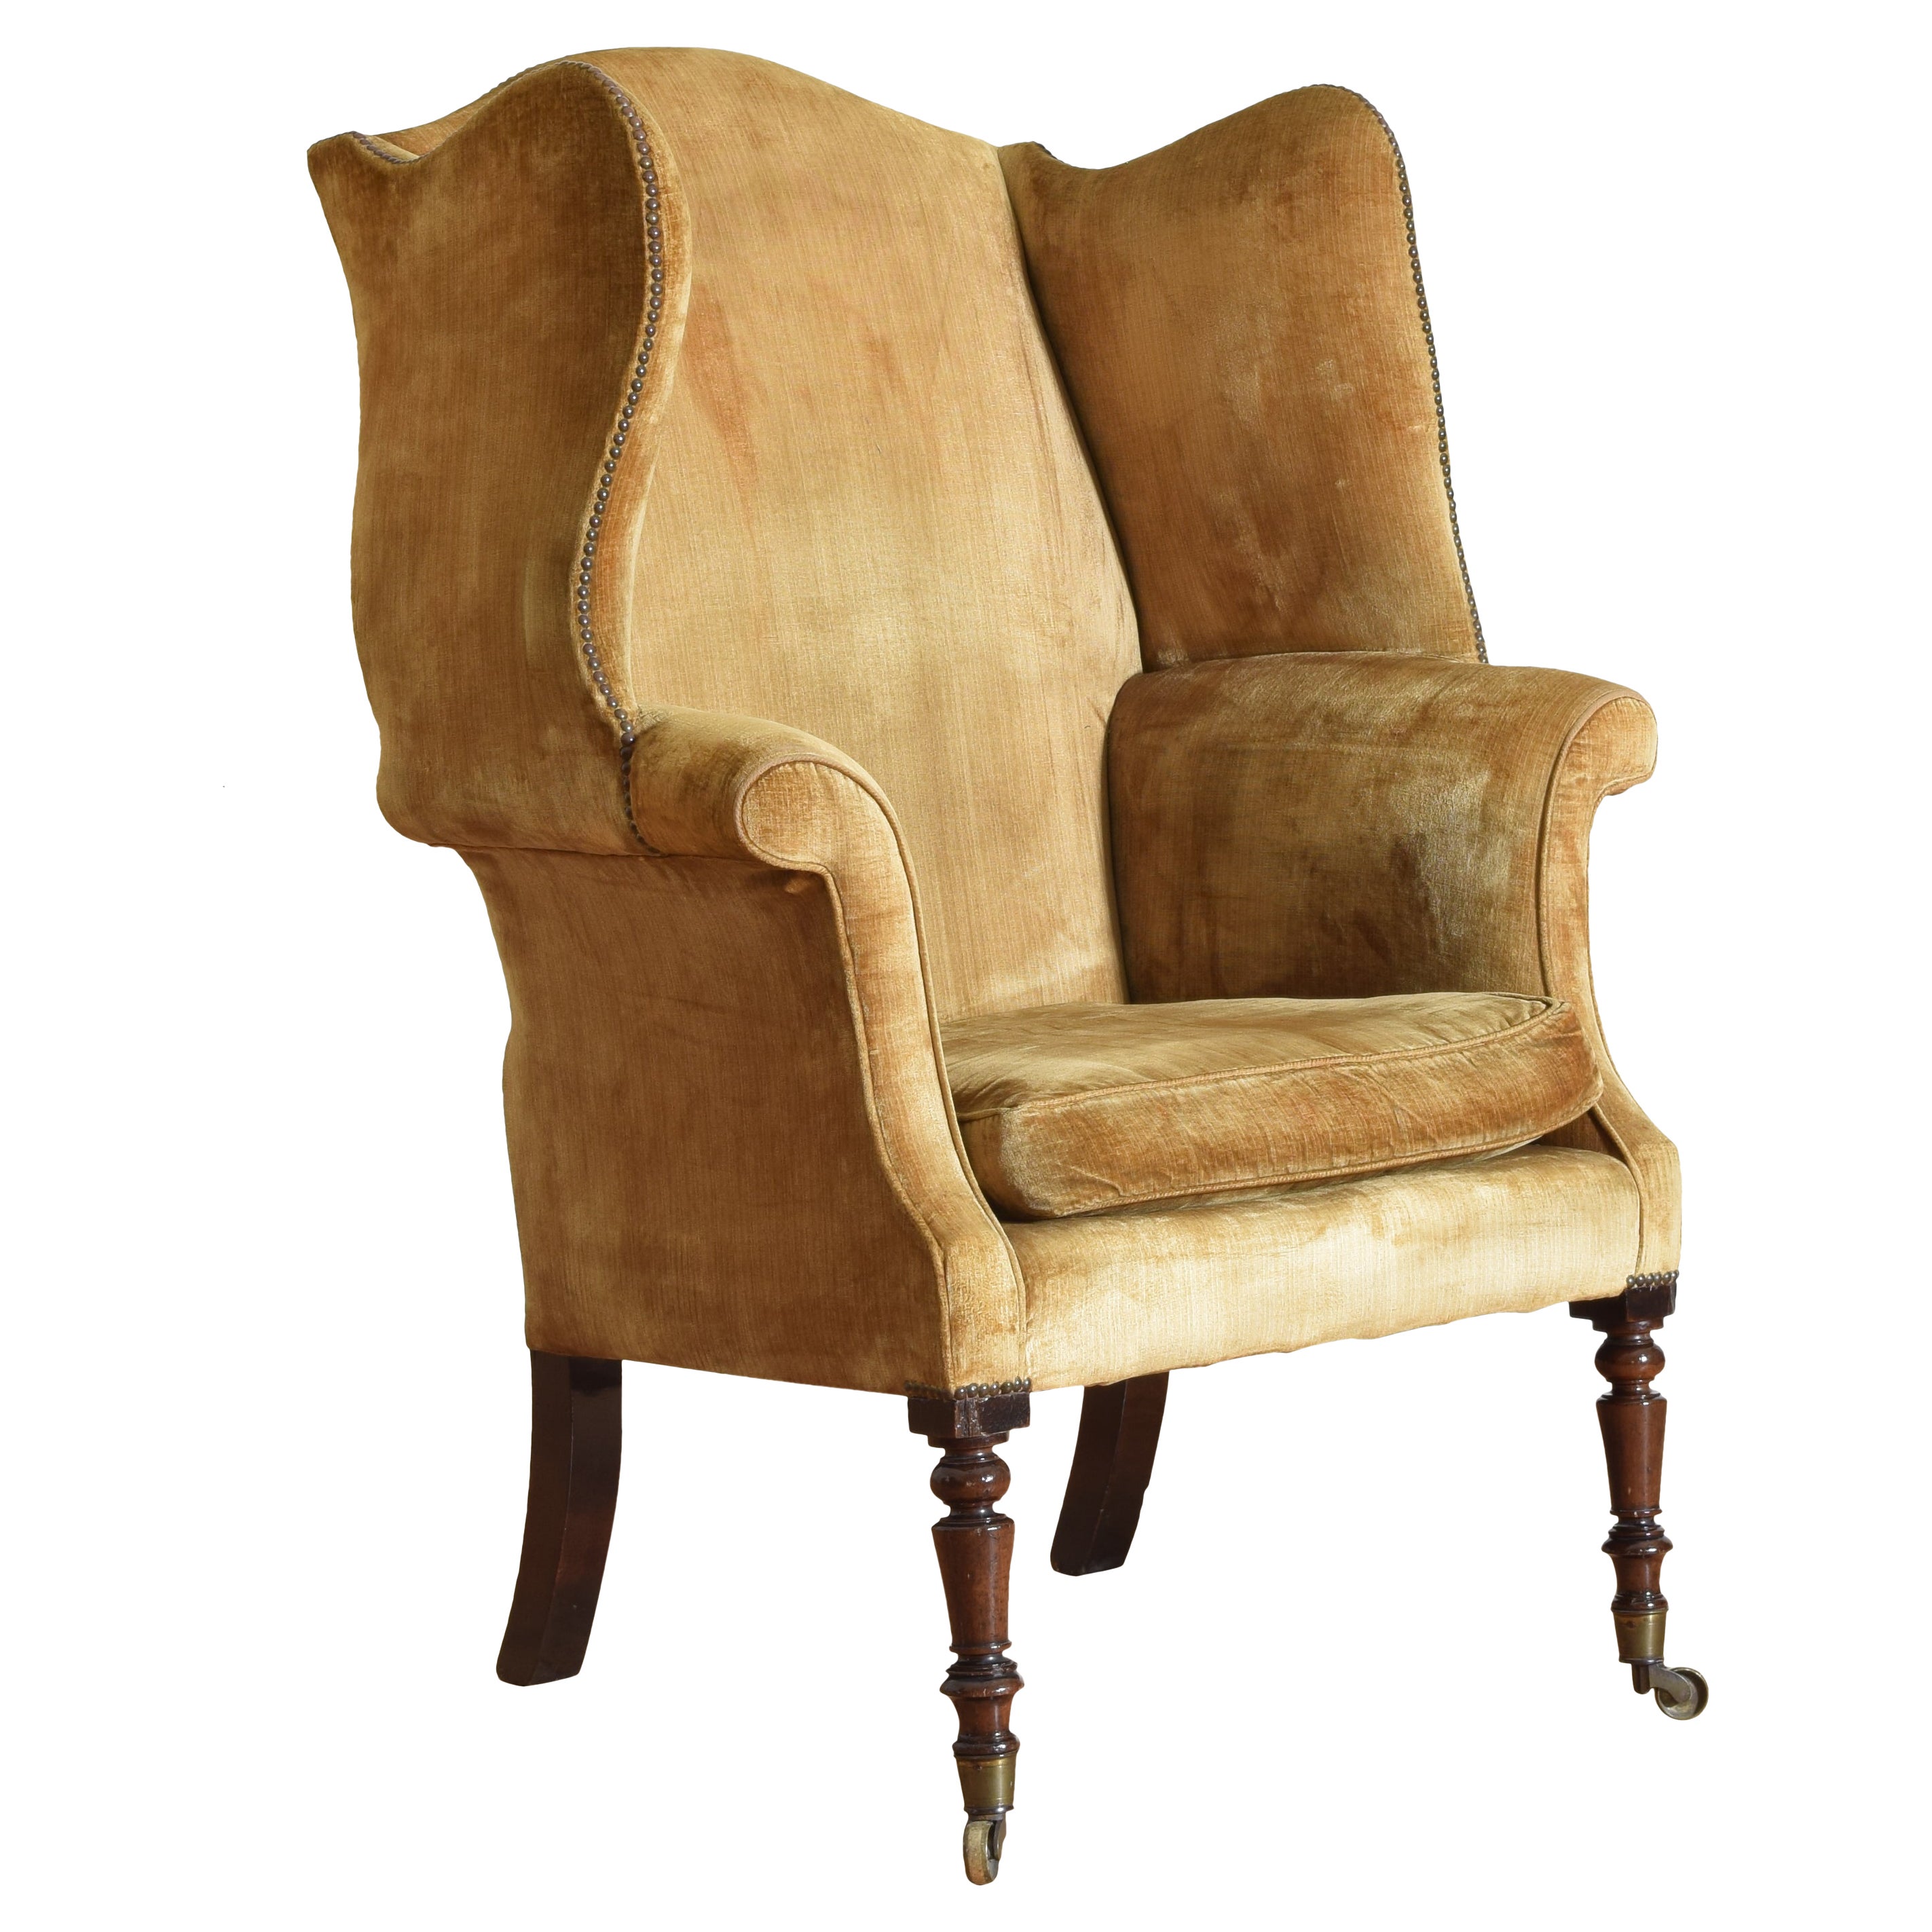 George III Period Mahogany and Upholstered Wing Armchair,  Ca. 1800